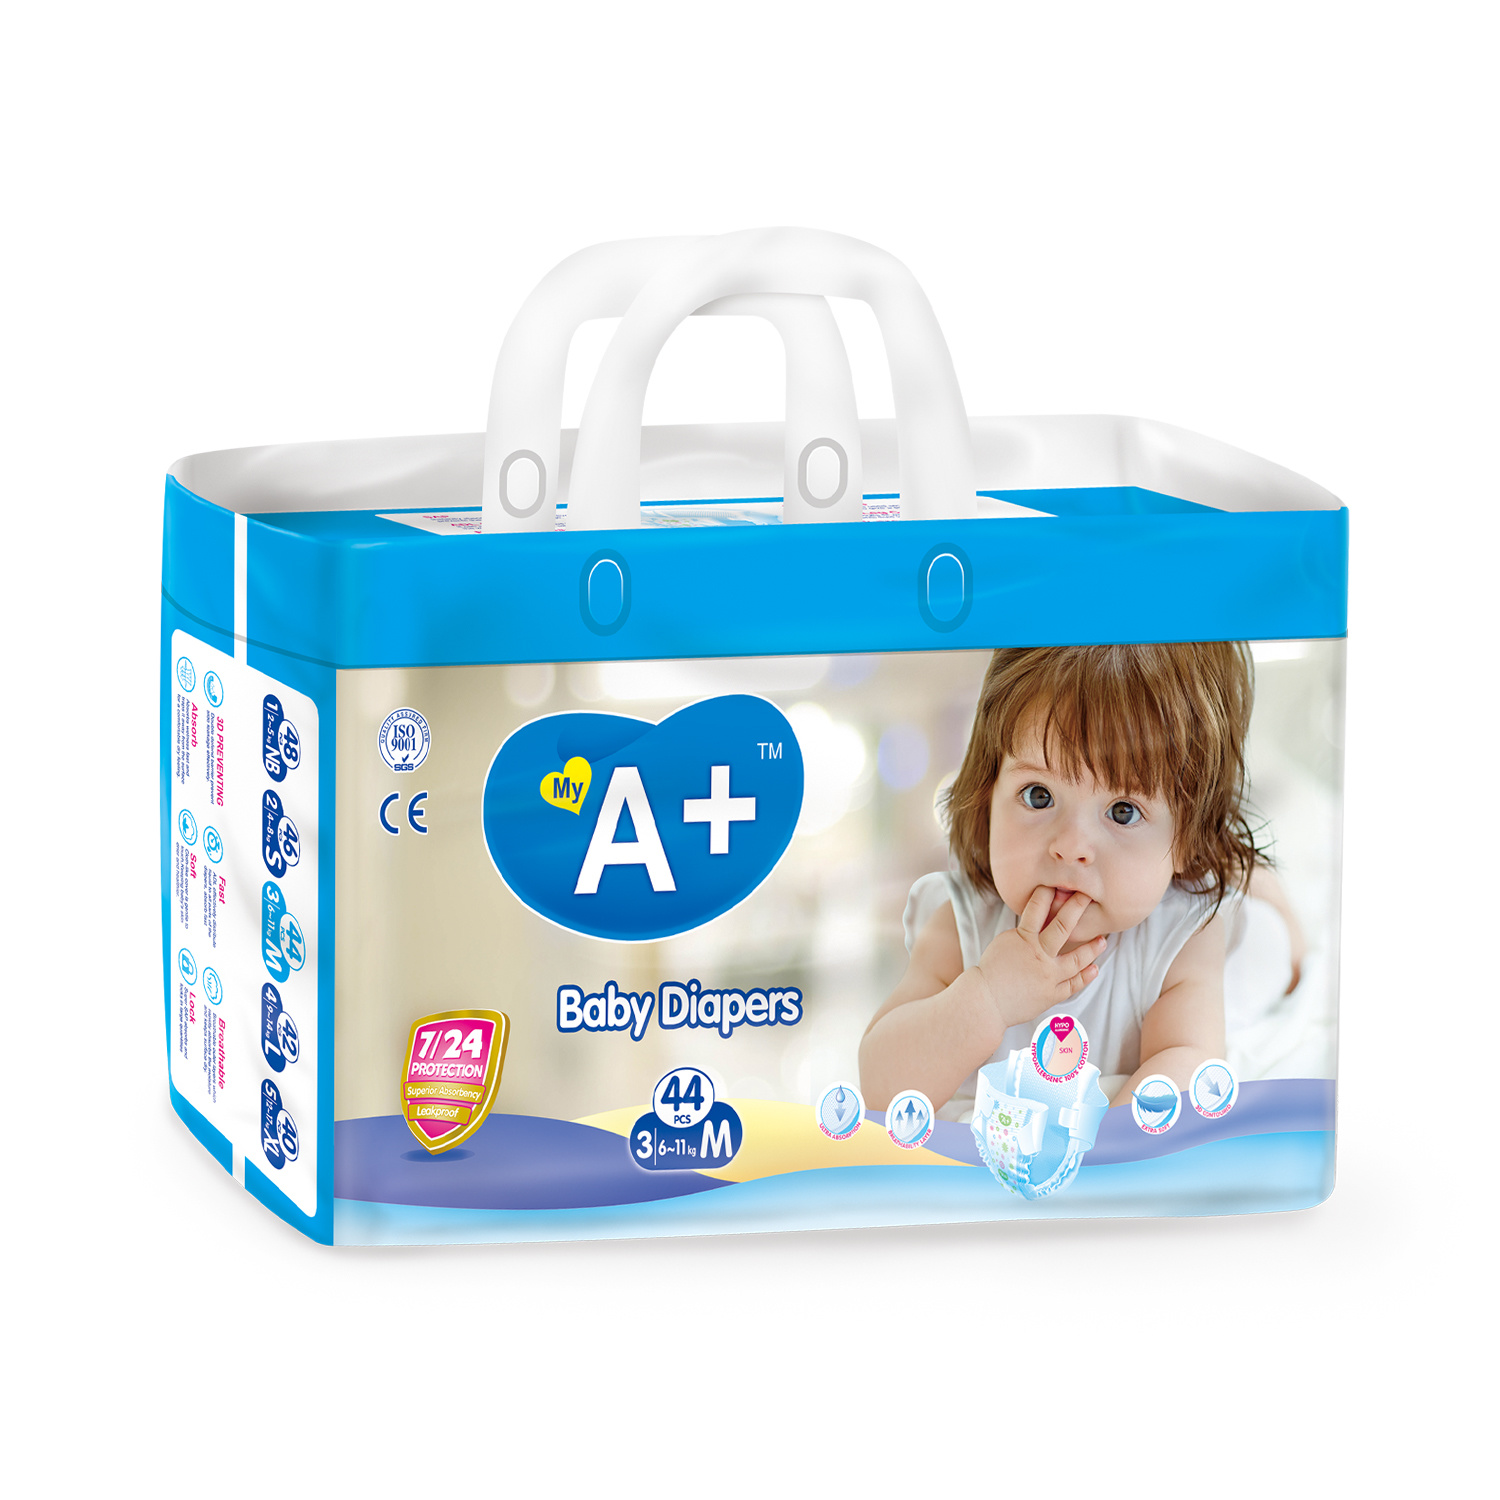 My A+ brand baby diaper